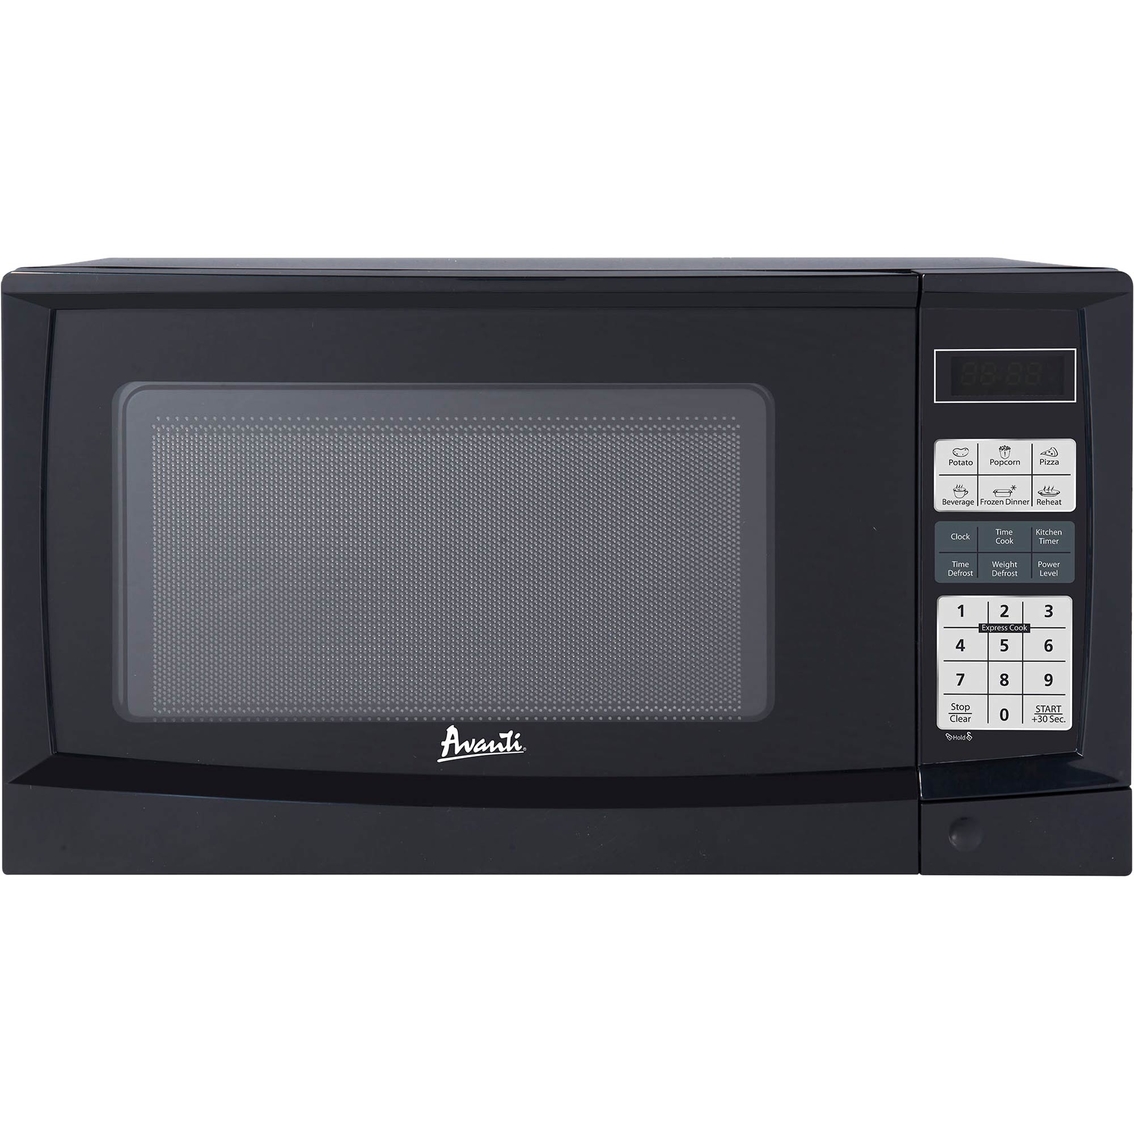 Avanti 0.9cuft Countertop Microwave Oven, White | Microwave Ovens